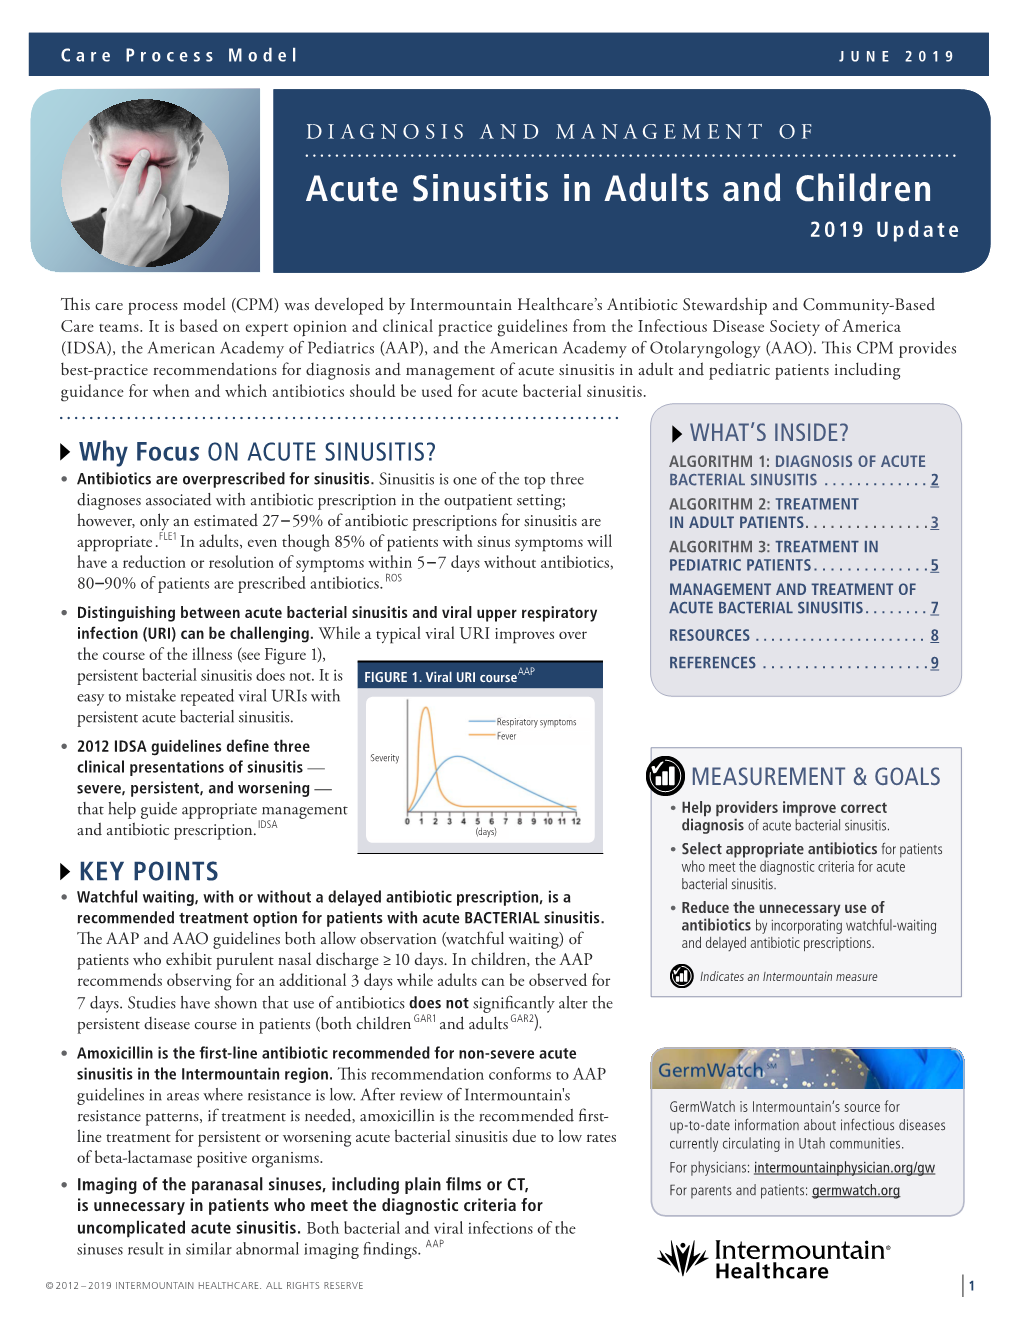 Care Process Models Acute Sinusitis in Adults and Children